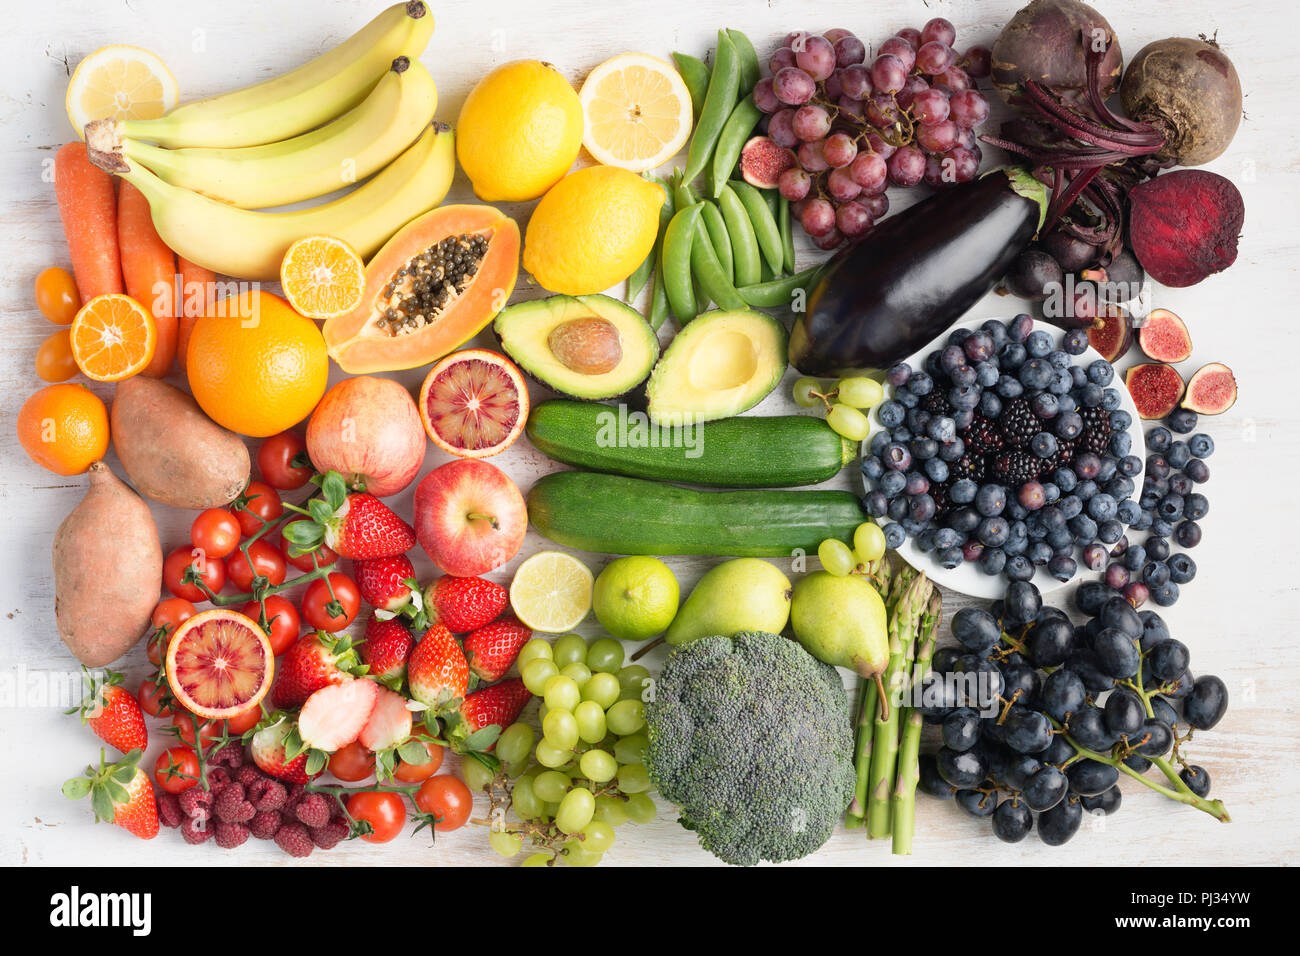 Healthy eating concept, assortment of rainbow fruits and vegetables, berries, bananas, oranges, grapes, broccoli, beetroot on the off white table arranged in a rectangle, top view, selective focus Stock Photo